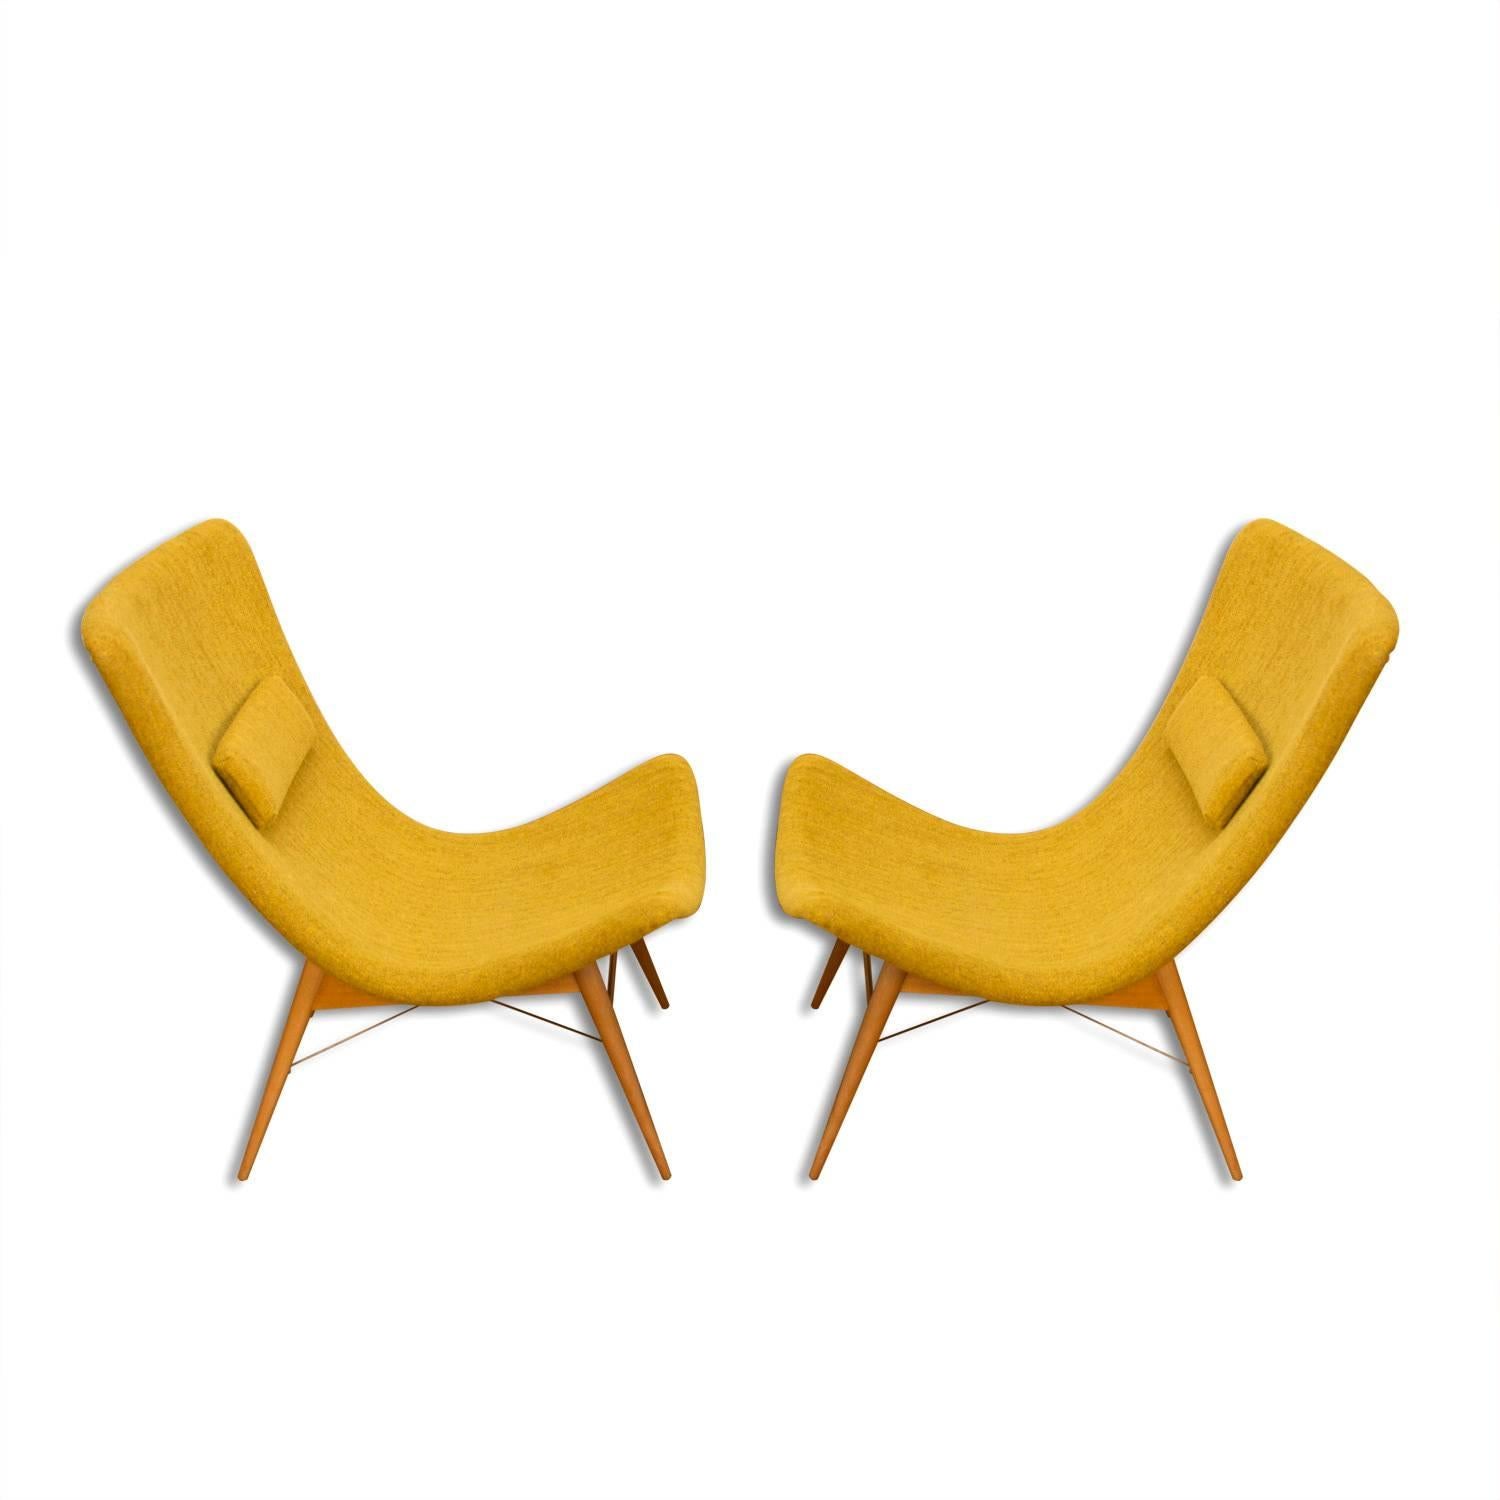 This pair of simple lounge chairs was designed in 1959 by Miroslav Navratil and produced by Ceský nábytek for the Trienalle in Milano. The seats are made of plastic laminate and have been professionally restored. They have been reupholstered and